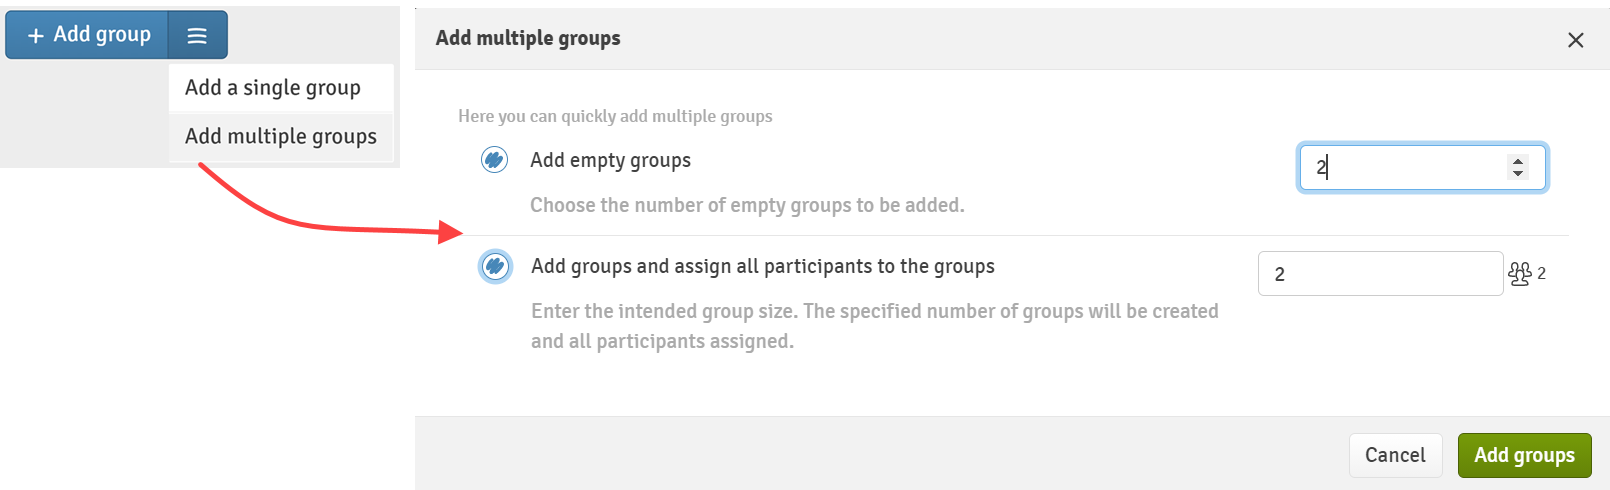 Add_multiple_groups.png